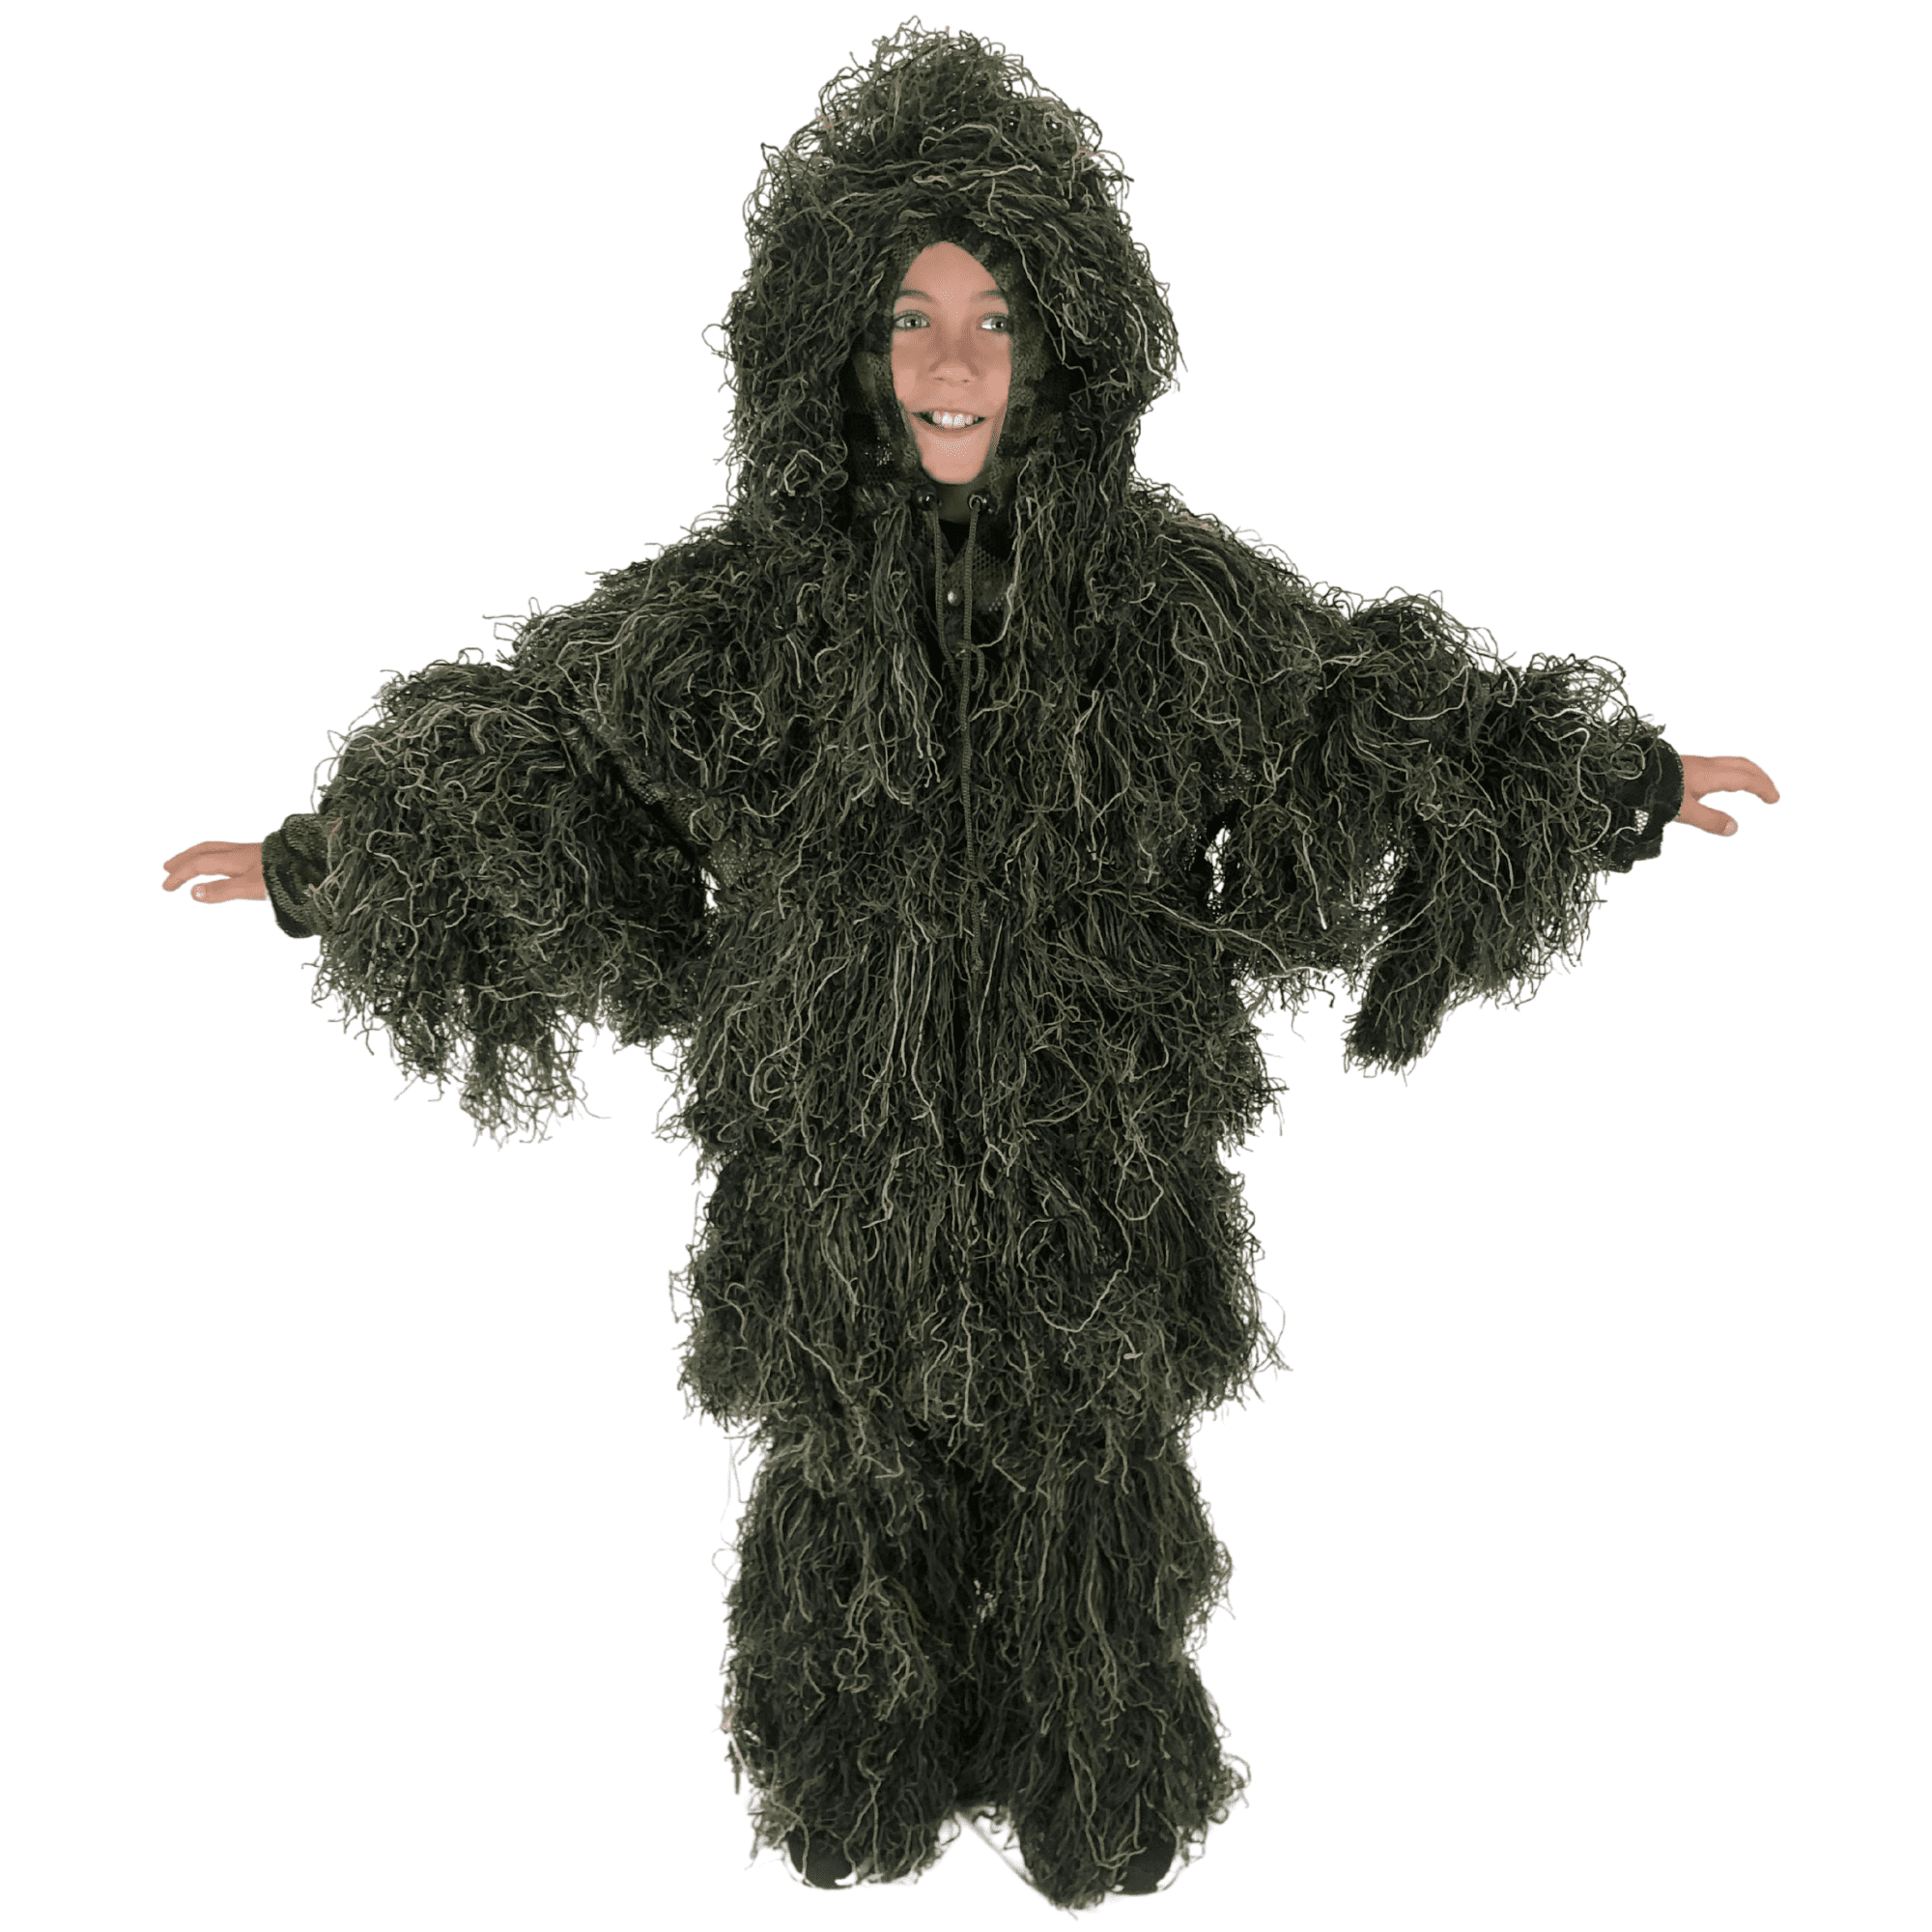 dry grass 3D camouflage suit Regular size Outdoor Ghost Ghillie Suit  woodland 